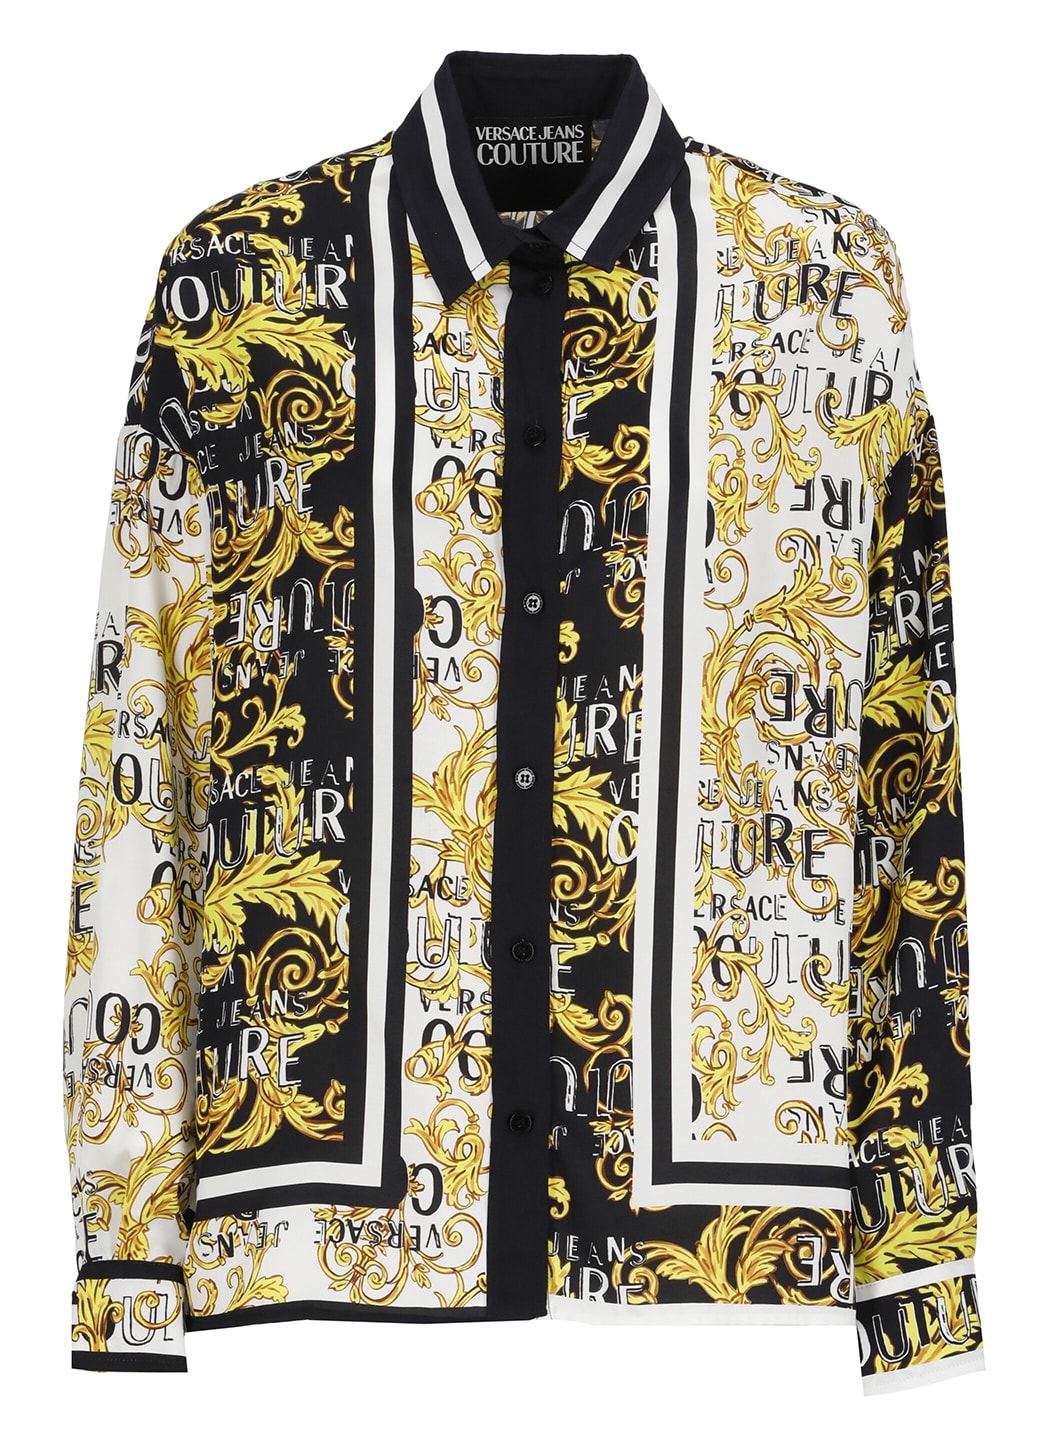 VERSACE JEANS COUTURE LOGO COUTURE SHIRT